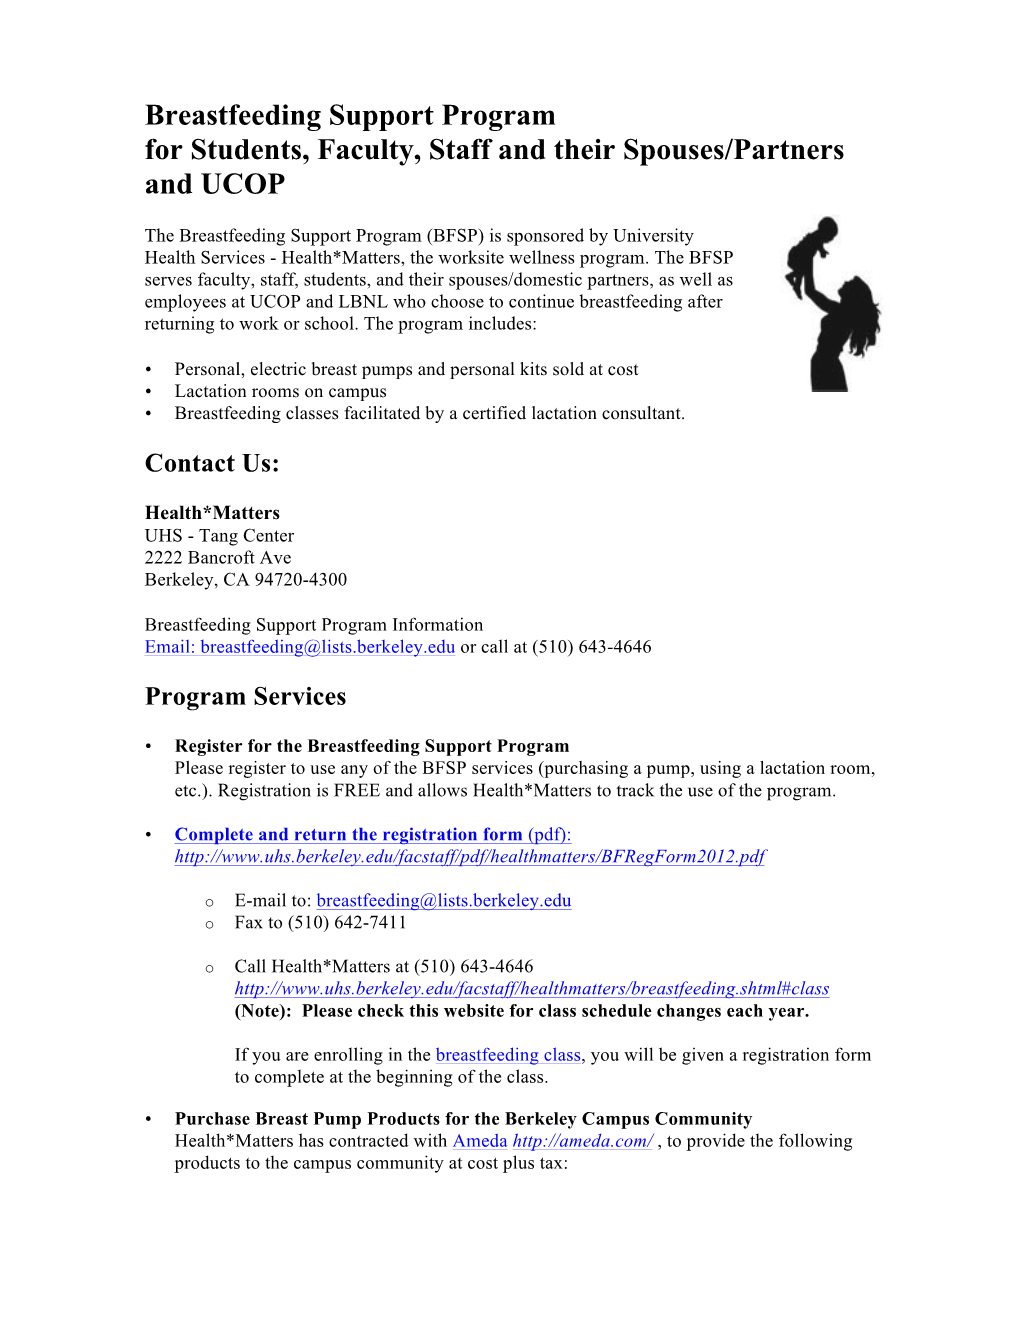 Breastfeeding Support Program for Students, Faculty, Staff and Their Spouses/Partners and UCOP